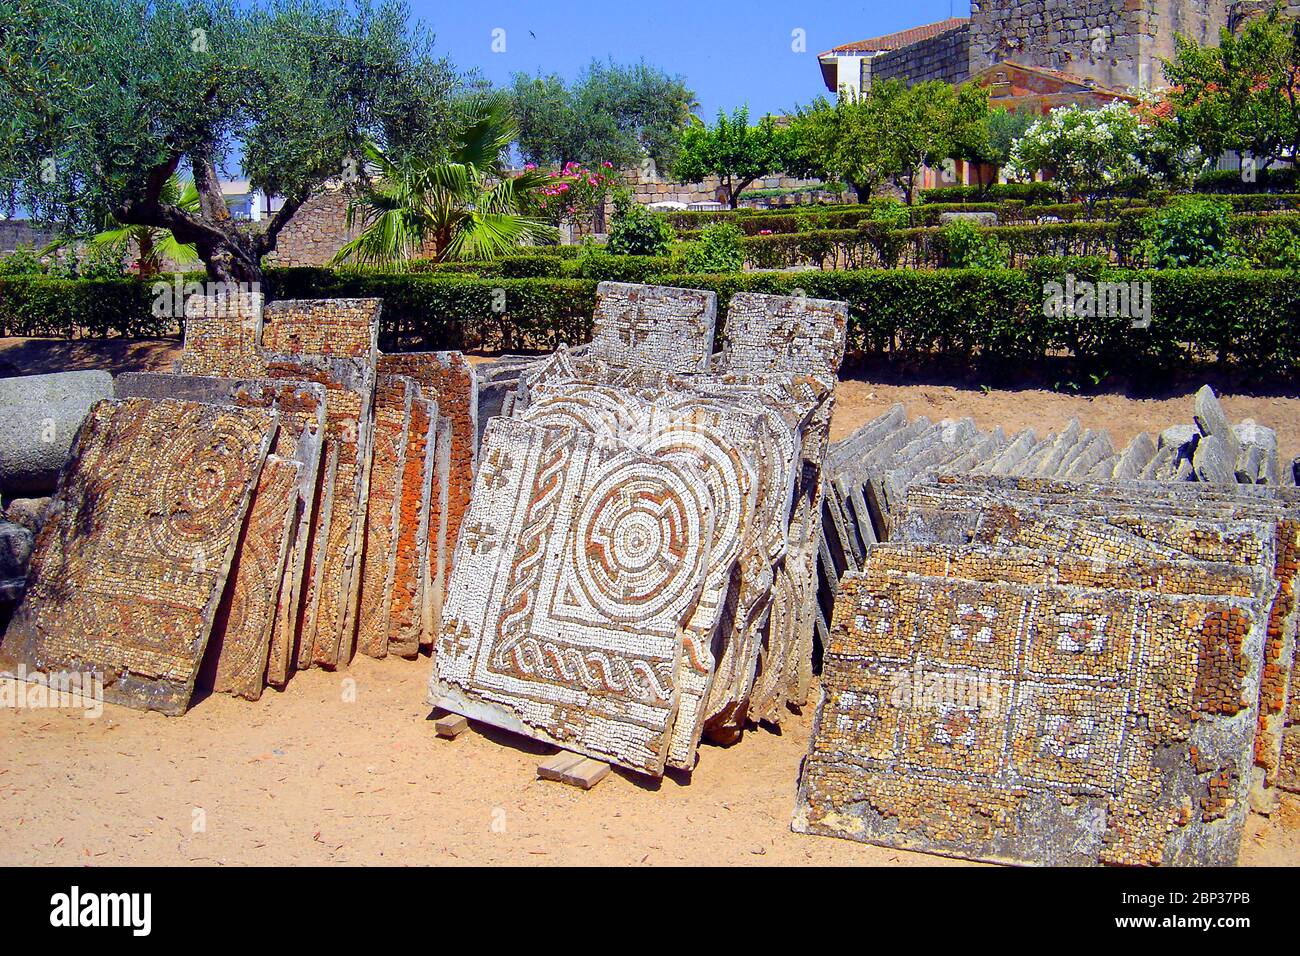 Recently uncovered Roman tesserae  mosaics, Merida, Spain, photographed in June 2006. The town was founded by veterans of the Roman Army in 25 BC, with the name of Emerita Augusta (meaning the veterans or discharged soldiers of the army of Augustus. Many Roman remains can be seen there including the longest of all existing Roman bridges Puente Romano still used by pedestrians, The Temple of Diana and  Aqueduct remains . The town hosts the Museo Nacional de Arte Romano (National Museum of Roman Art) which holds Roman artifacts and artwork from around Spain. Stock Photo